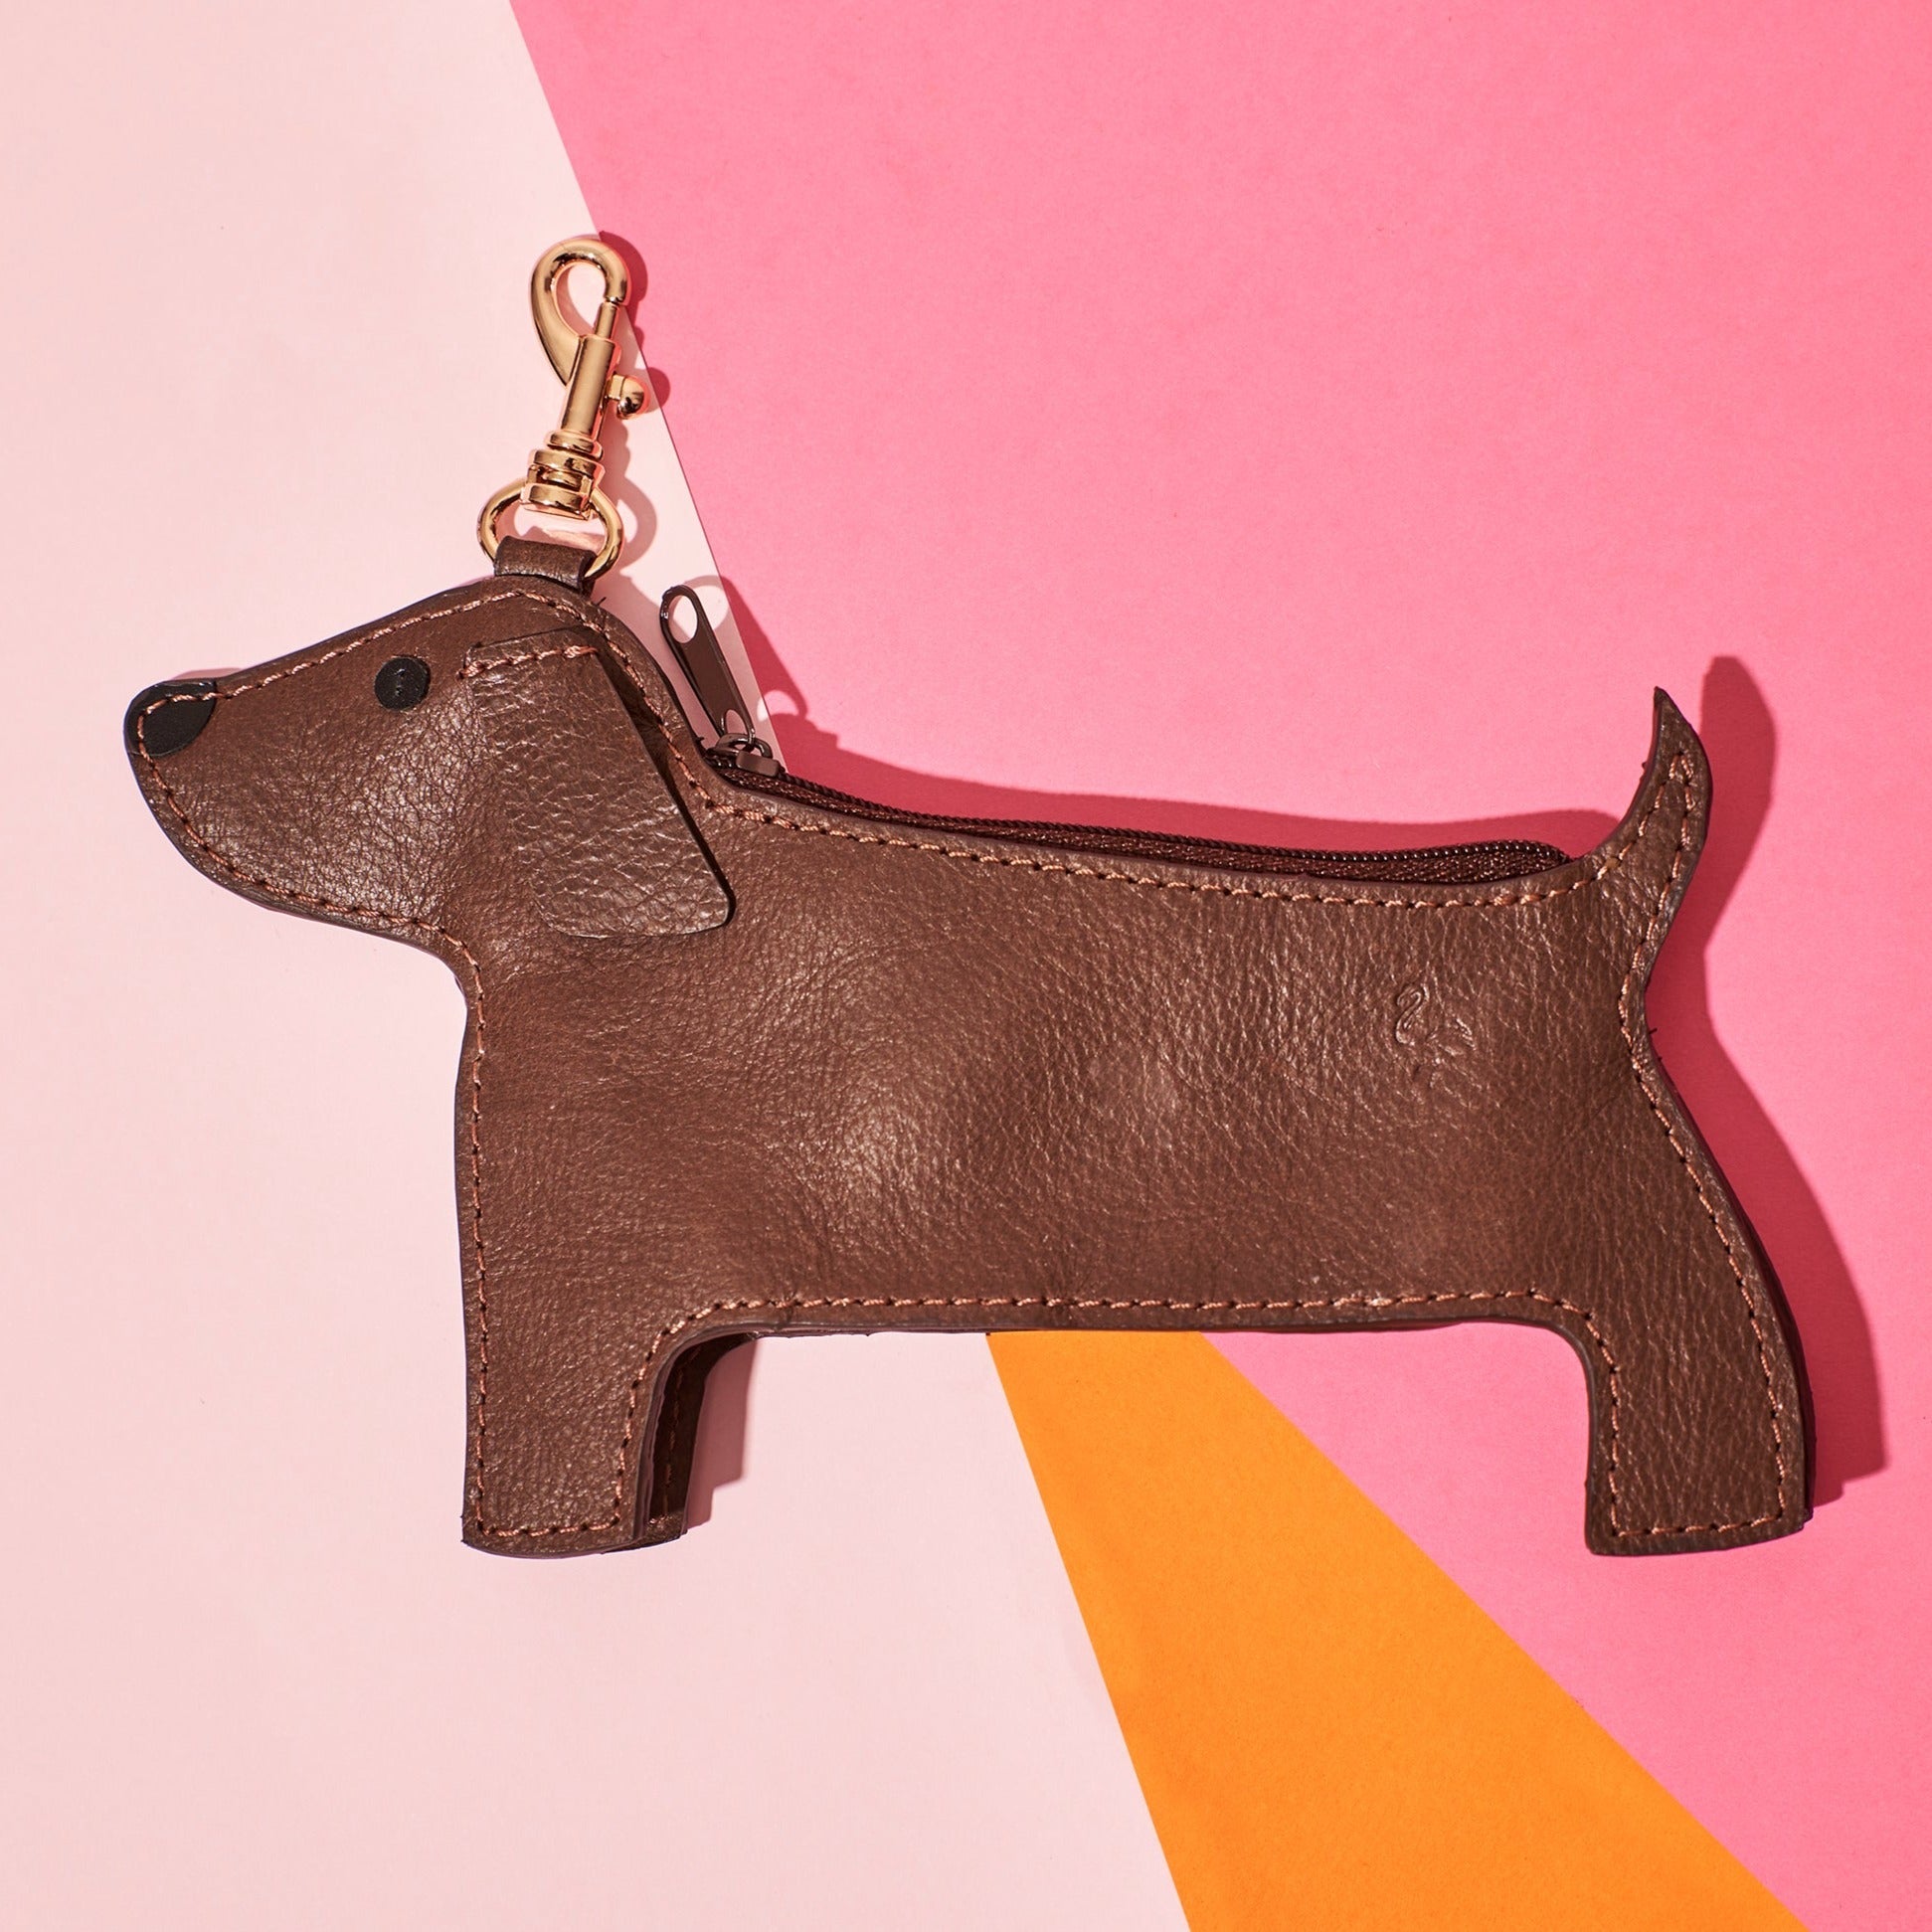 Wicker Darling's Salami the Sausage Dog Coin Purse on a colourful background